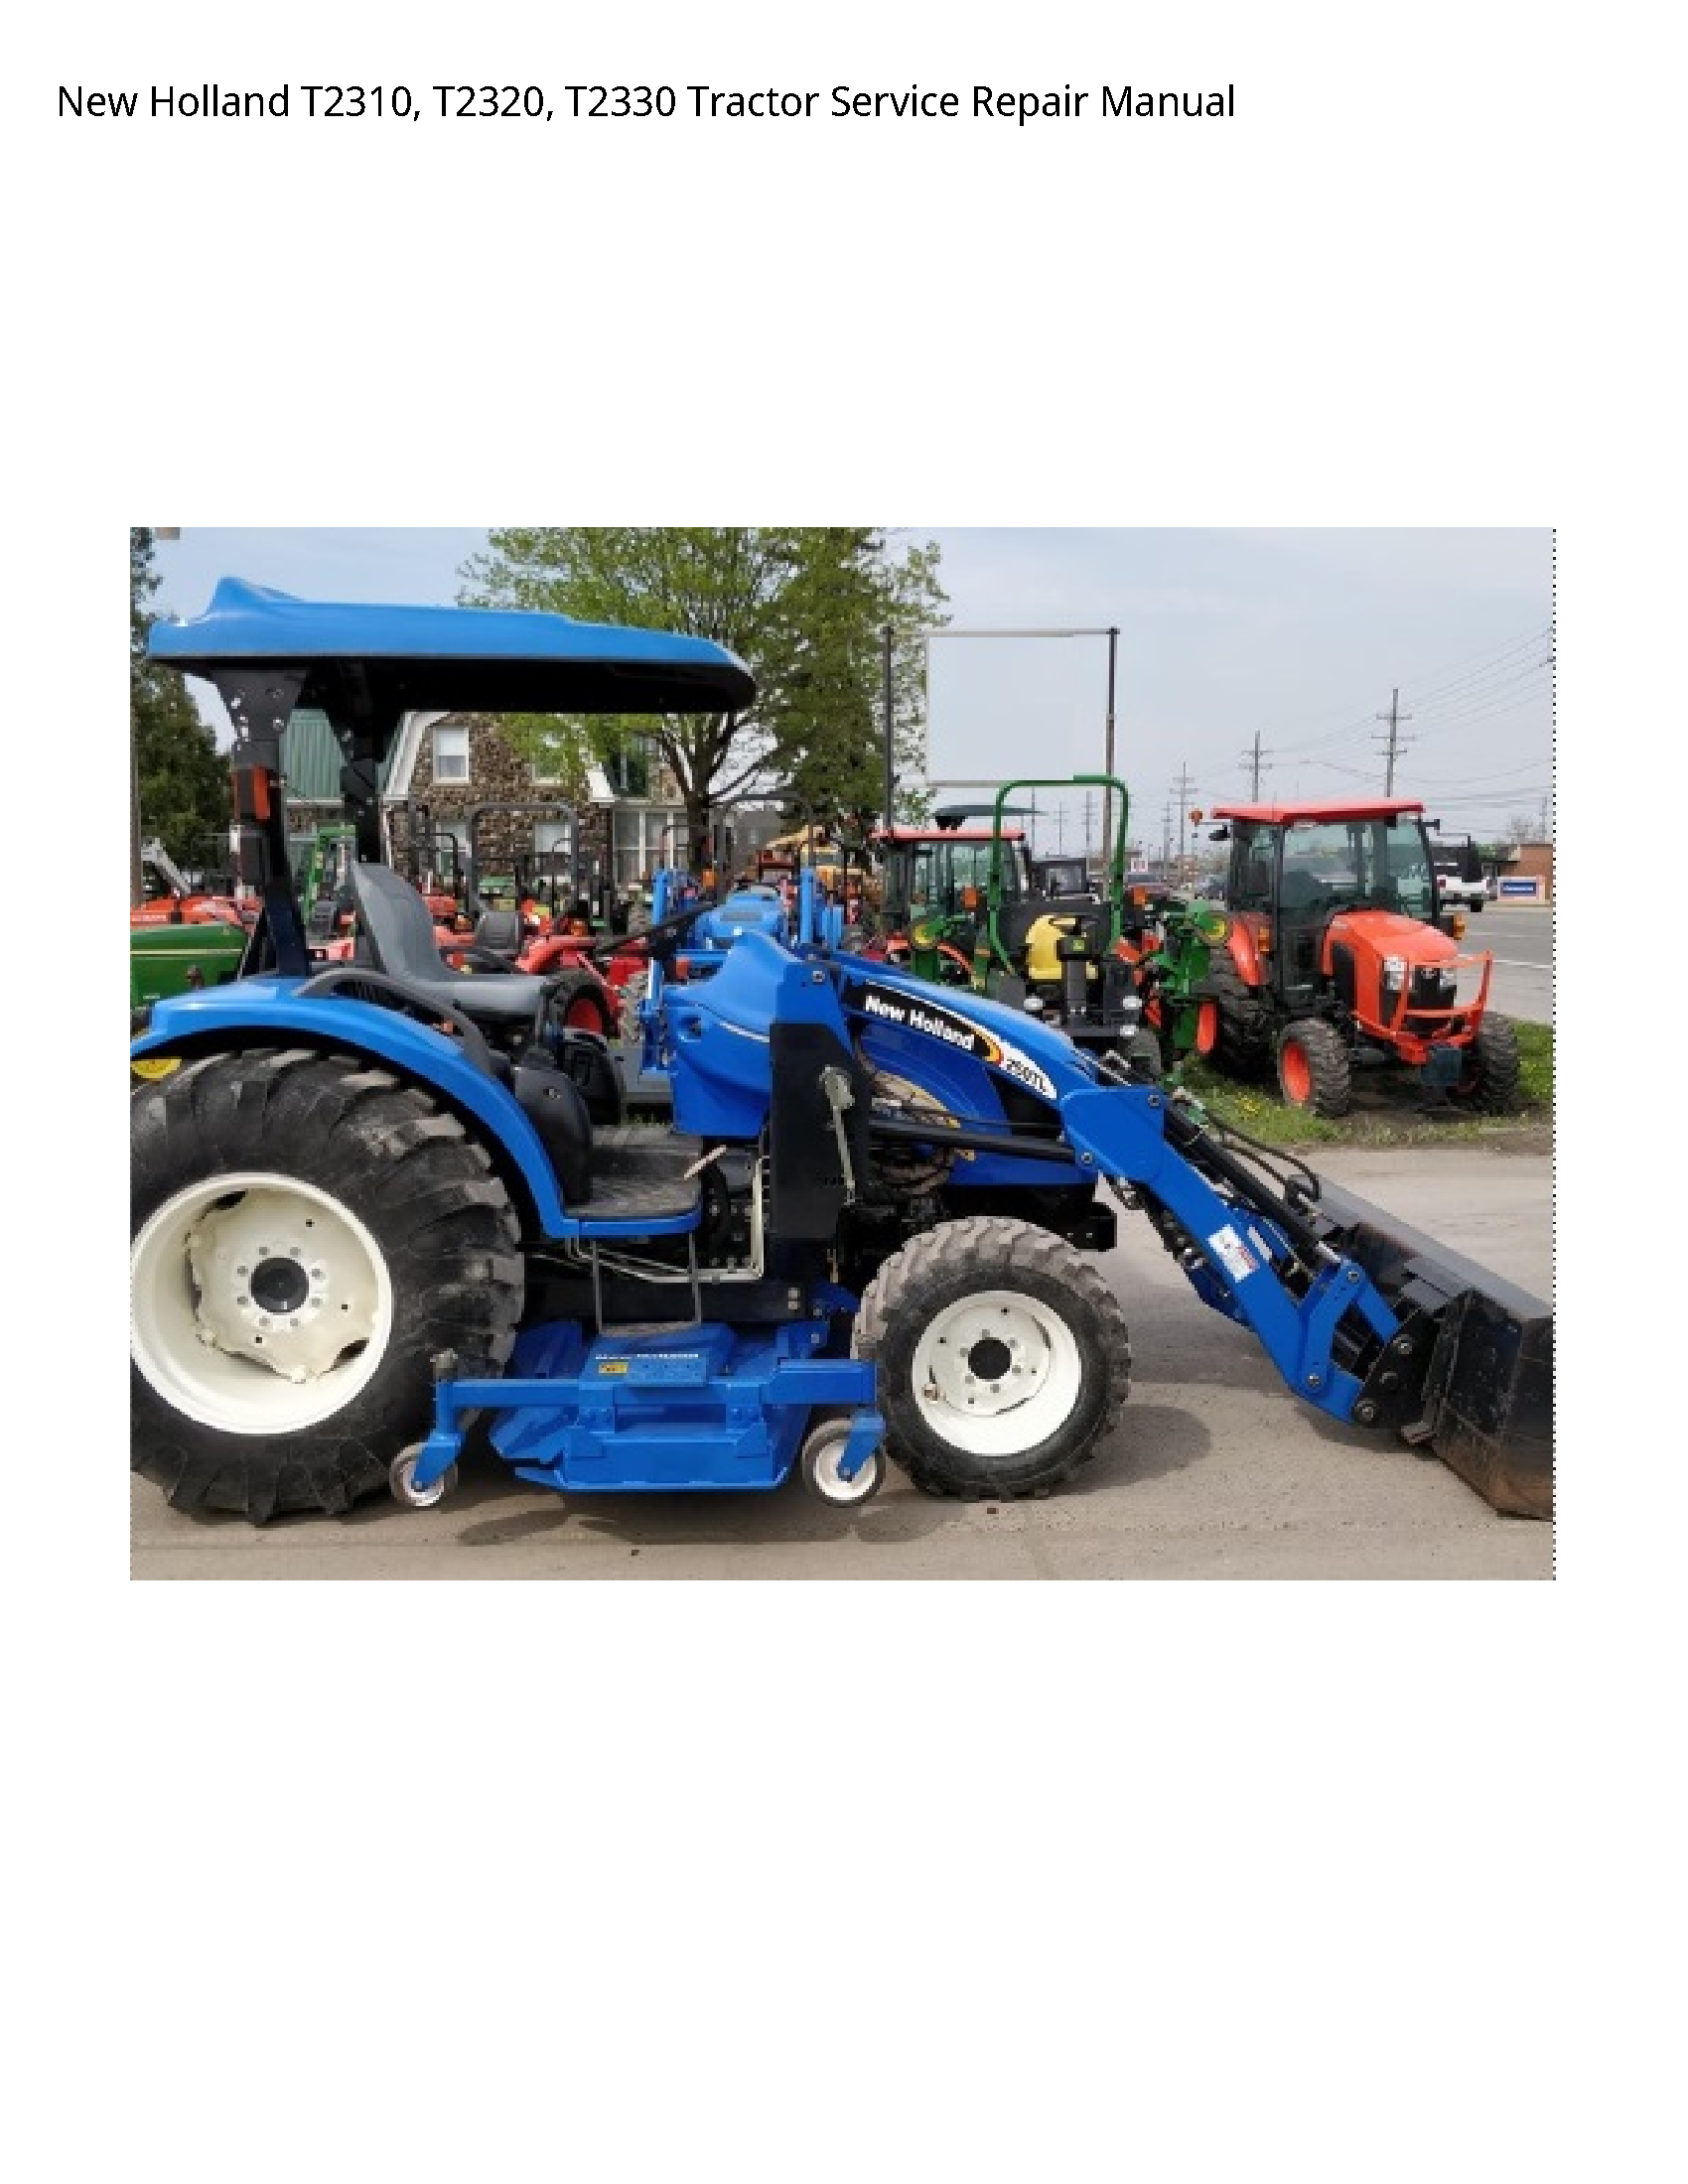 New Holland T2310 Tractor manual